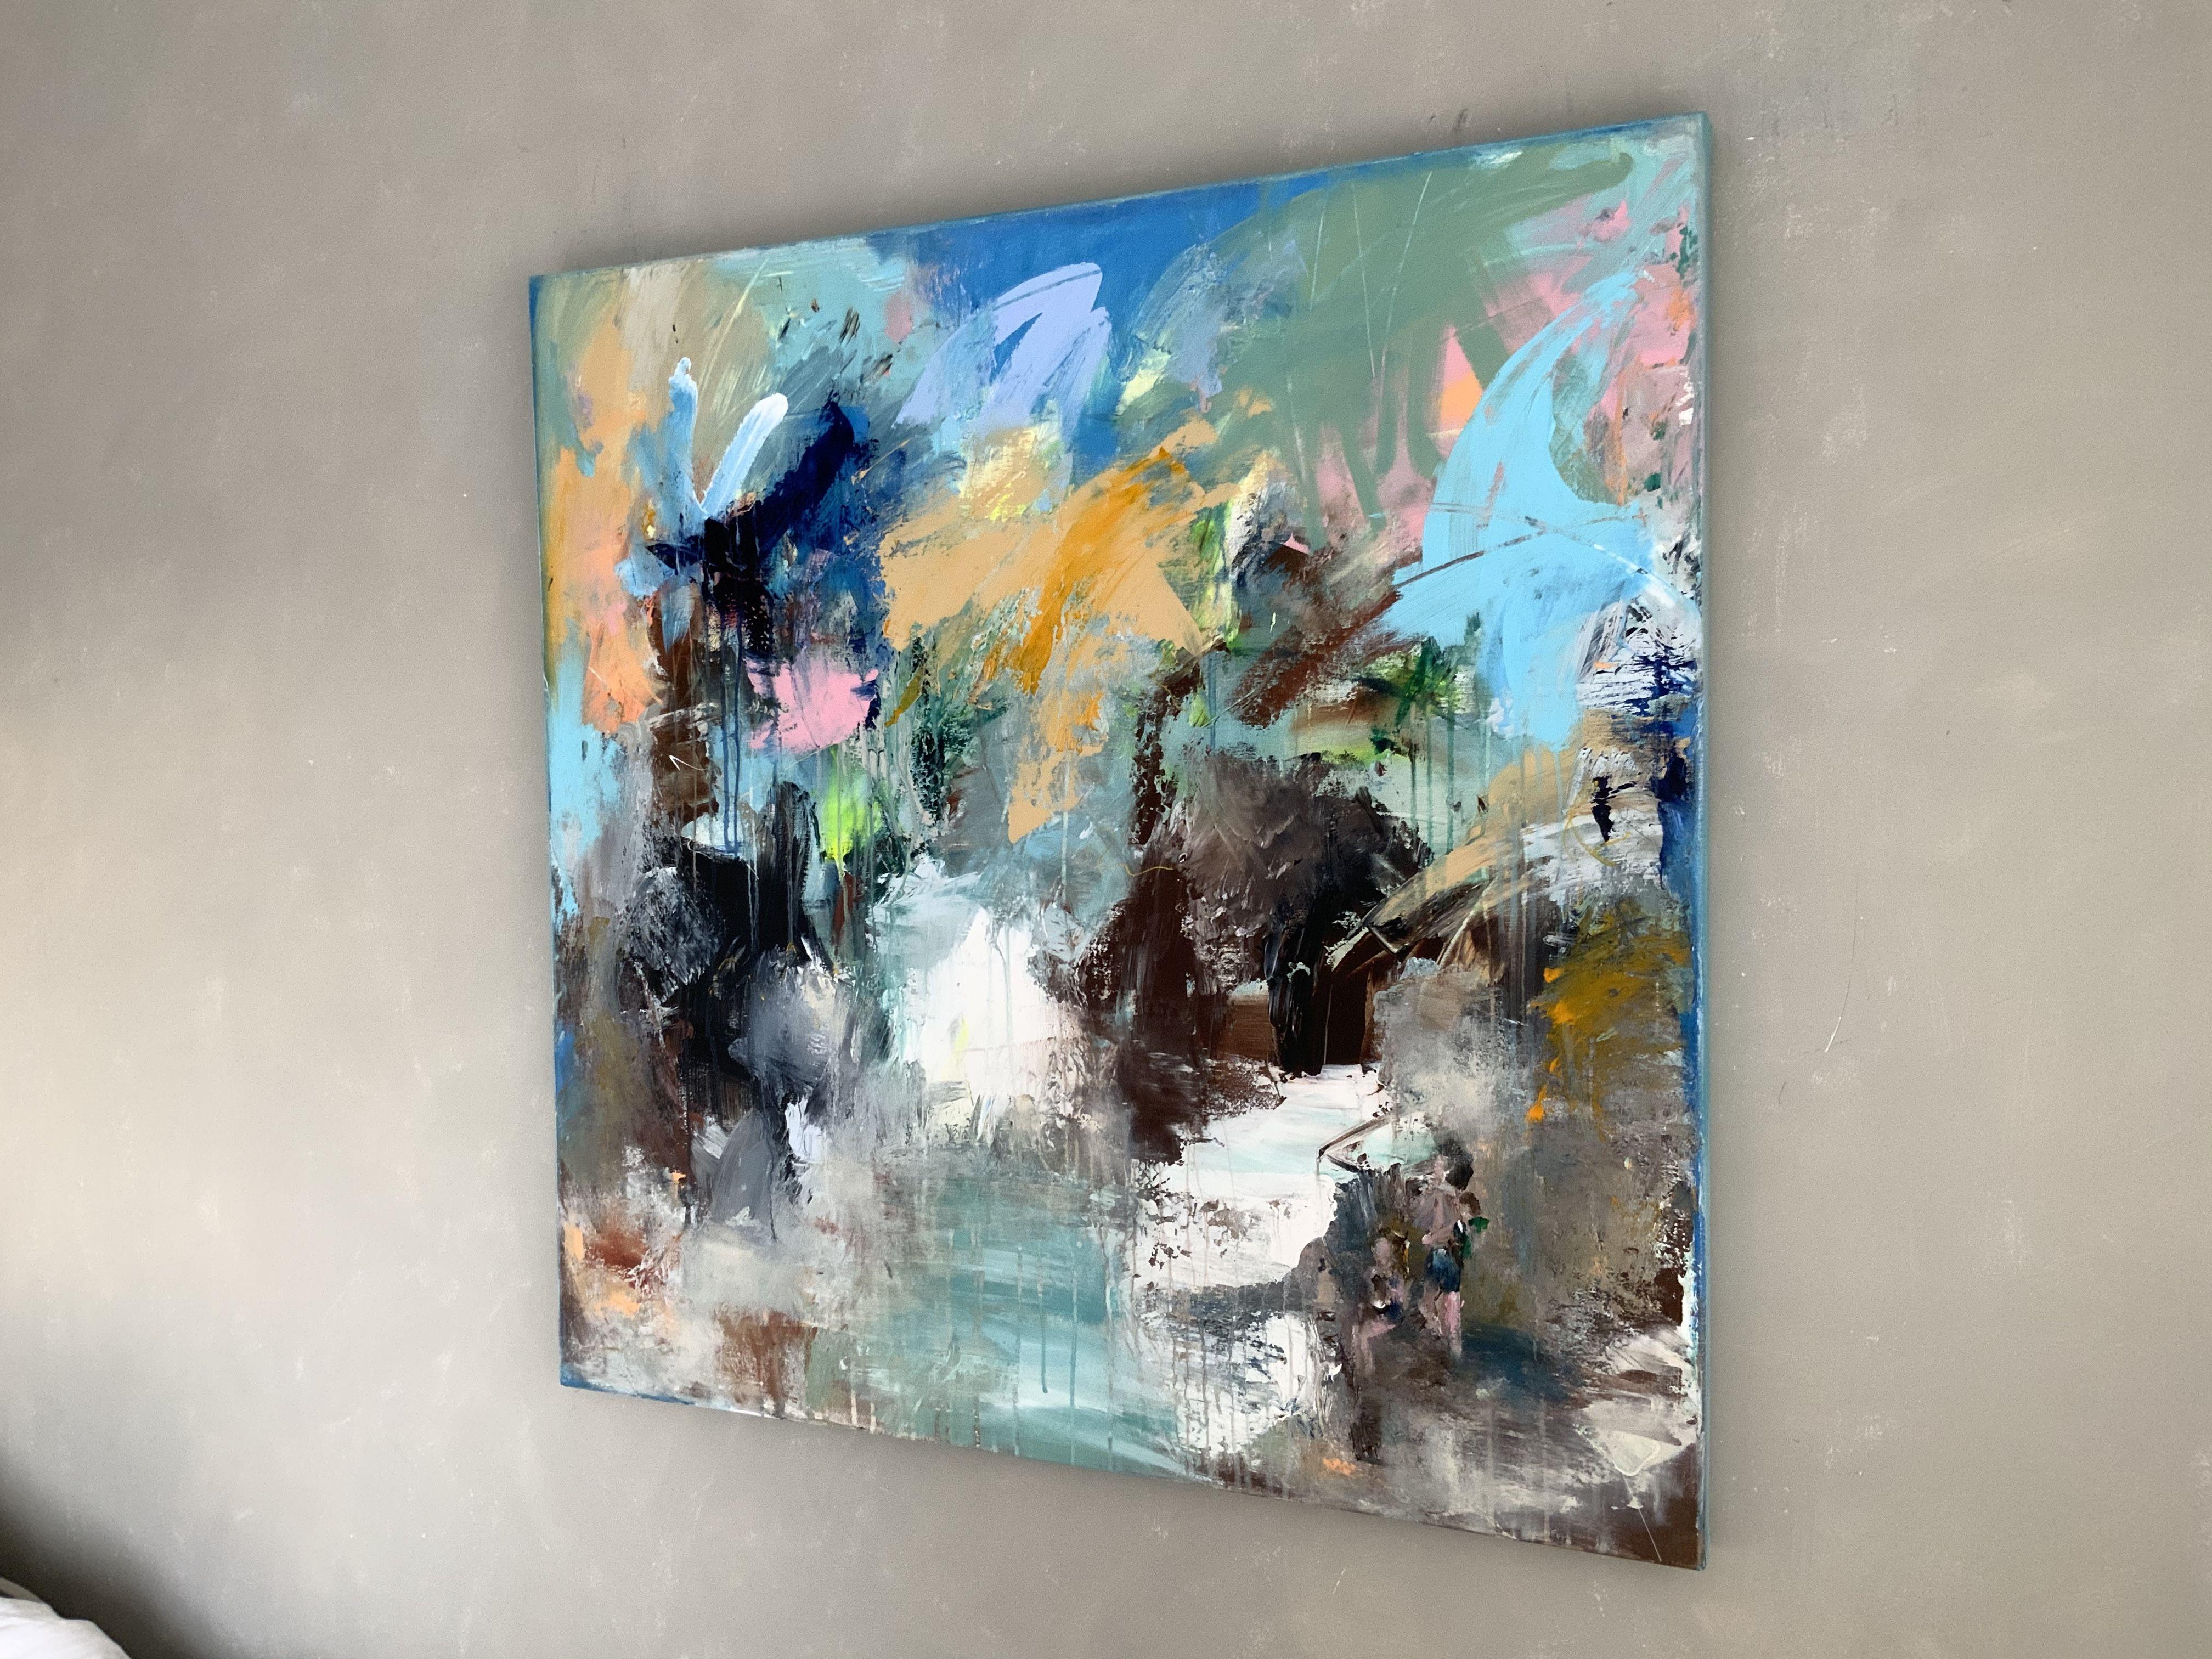 I see an abstract painting with a lot of colors, but I can see a landscape   too with flowers,  a jungle landscape, a family with children......  but it's not what you look at that matters, it's what YOU see.  , :: Painting :: Modern :: This piece